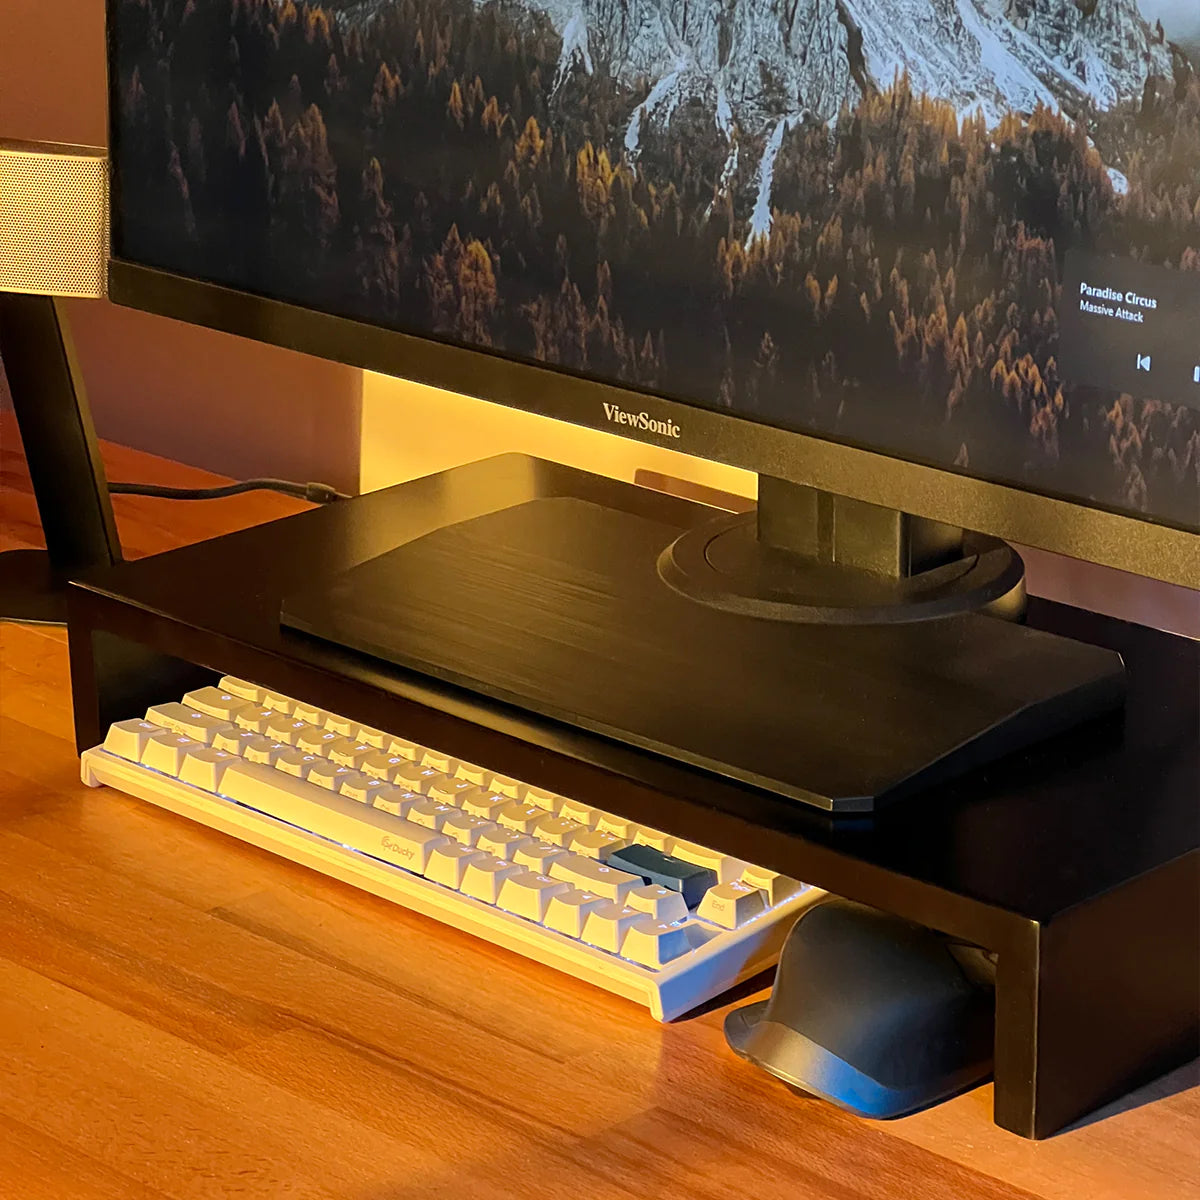 Modern stand riser by woodsy with a monitor, mechanical keyboard, mouse on wooden desk and warm lighting.